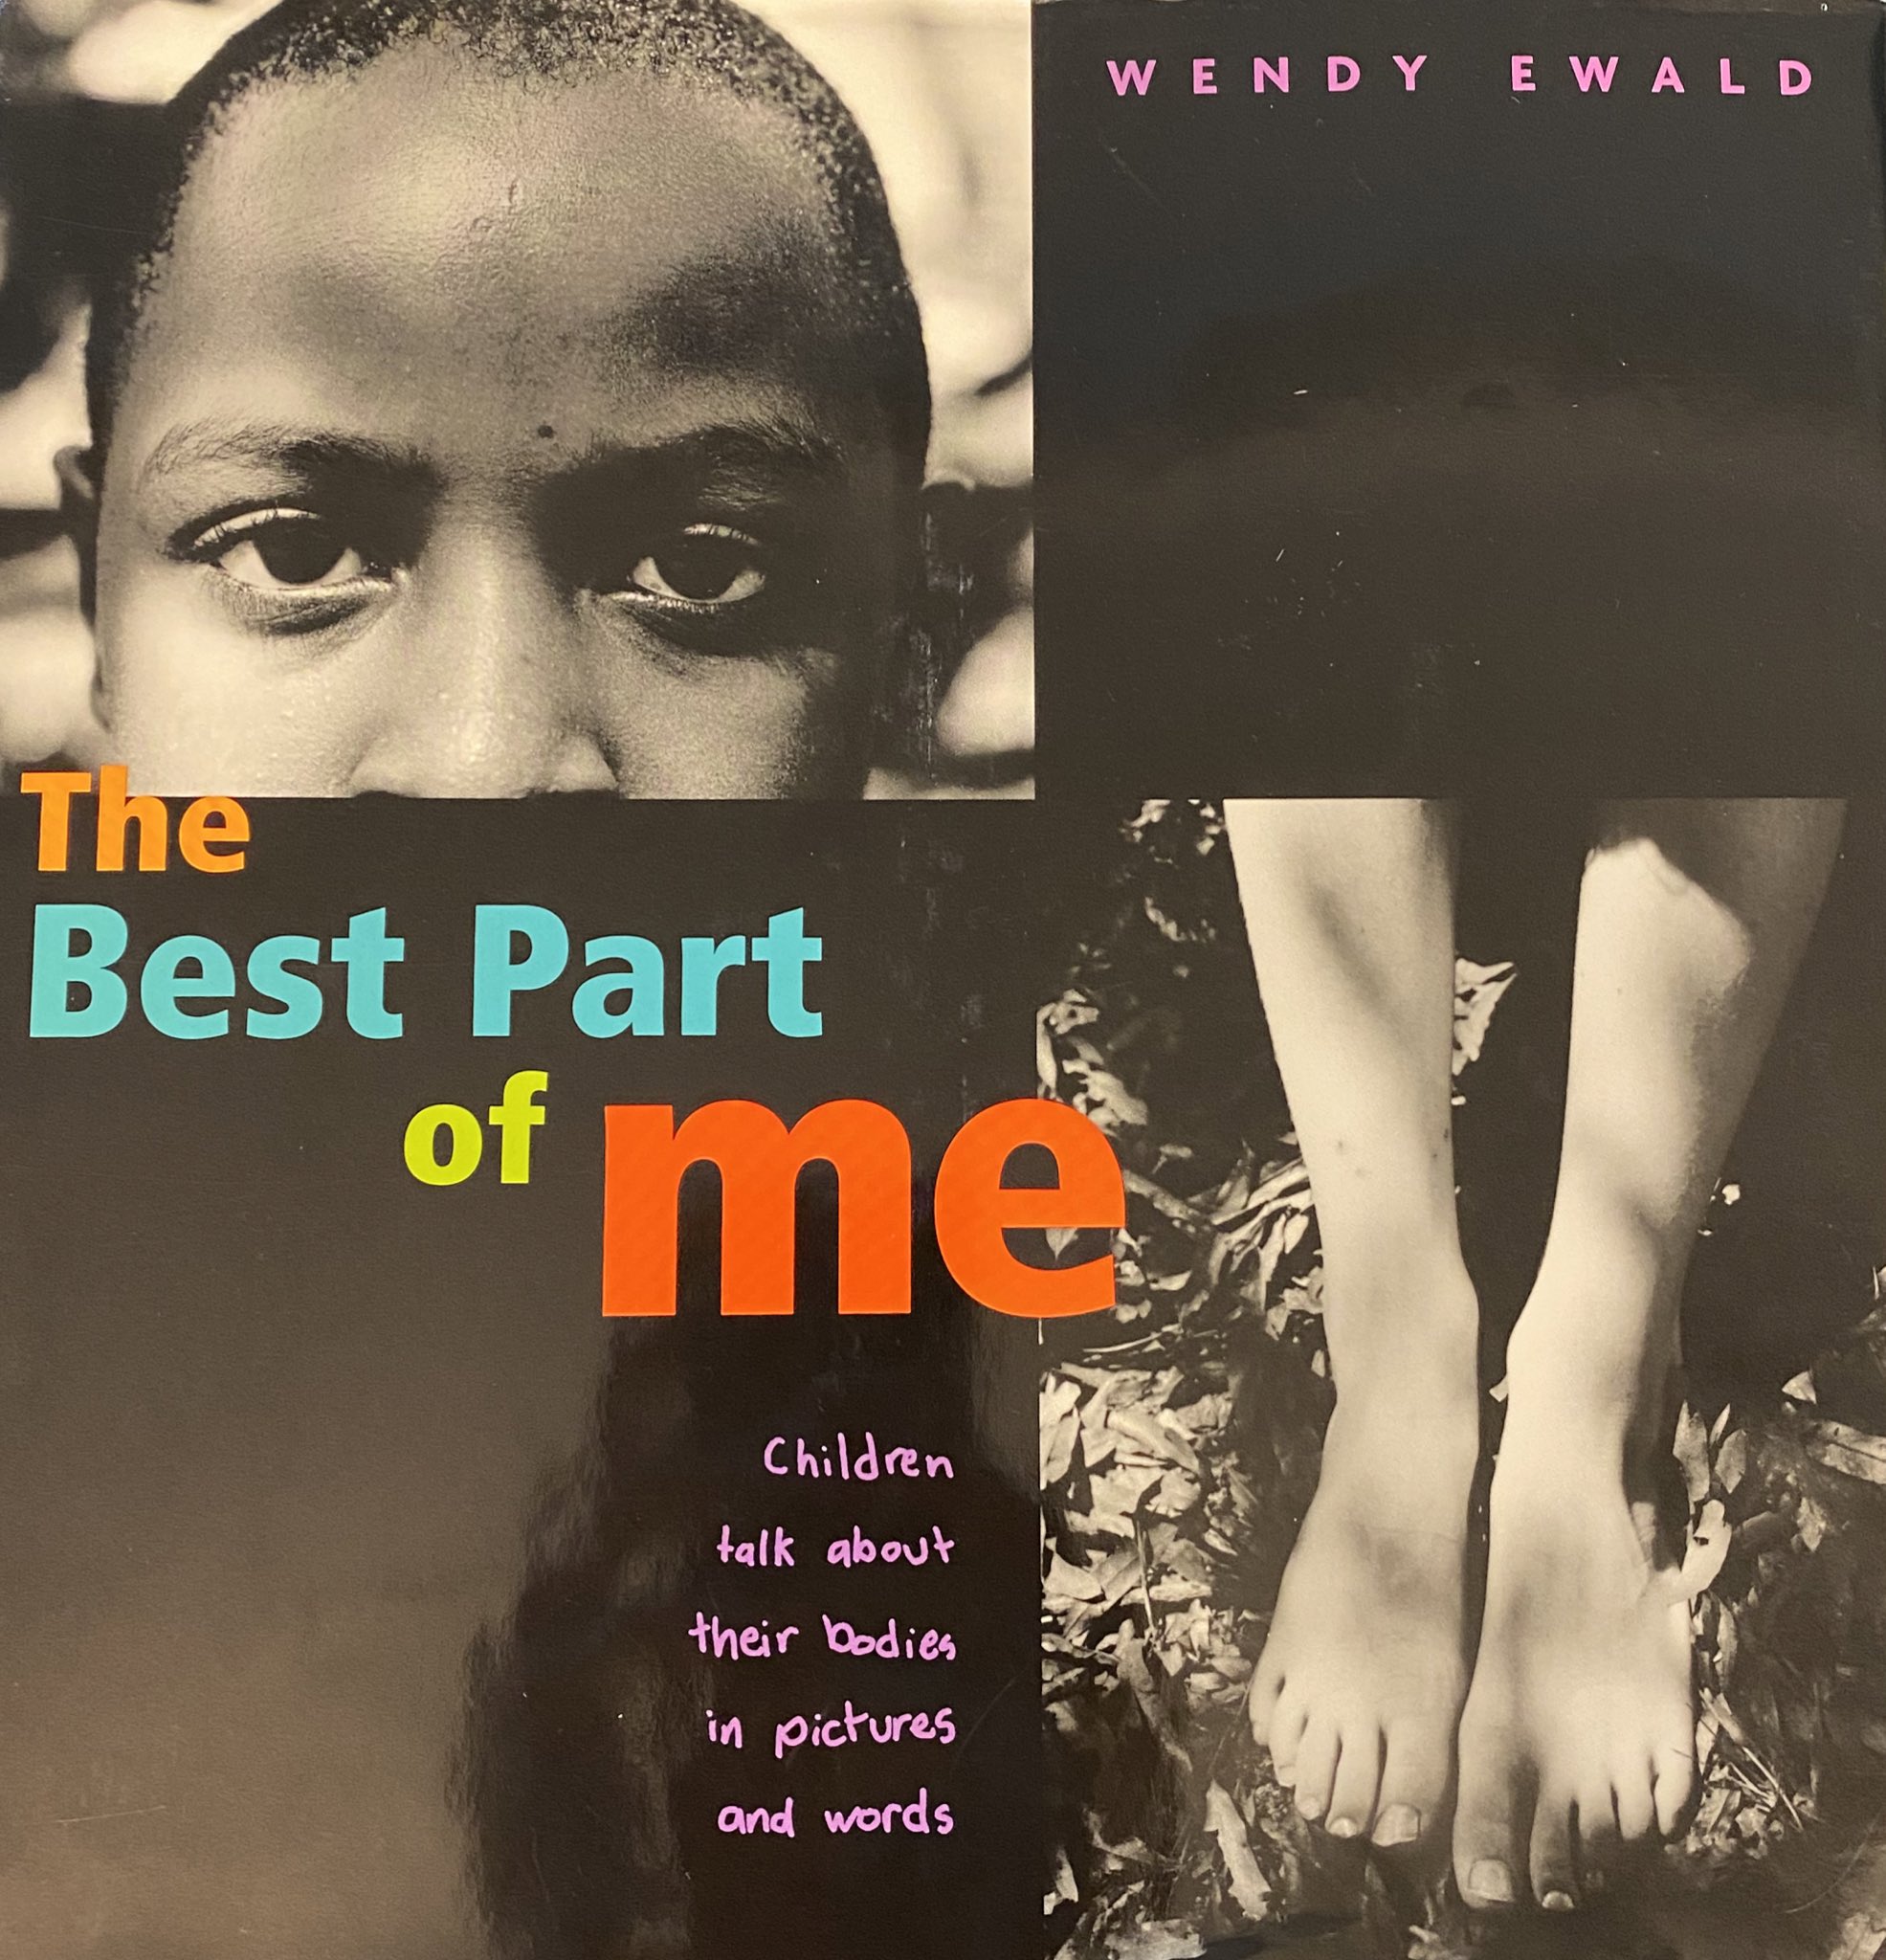 Marisa Owen My Fourth Grade Friends And I Read Wendy Ewald S The Best Part Of Me This Book Is A Compilation Of Poems Written By 2nd Through 5th Grade Students